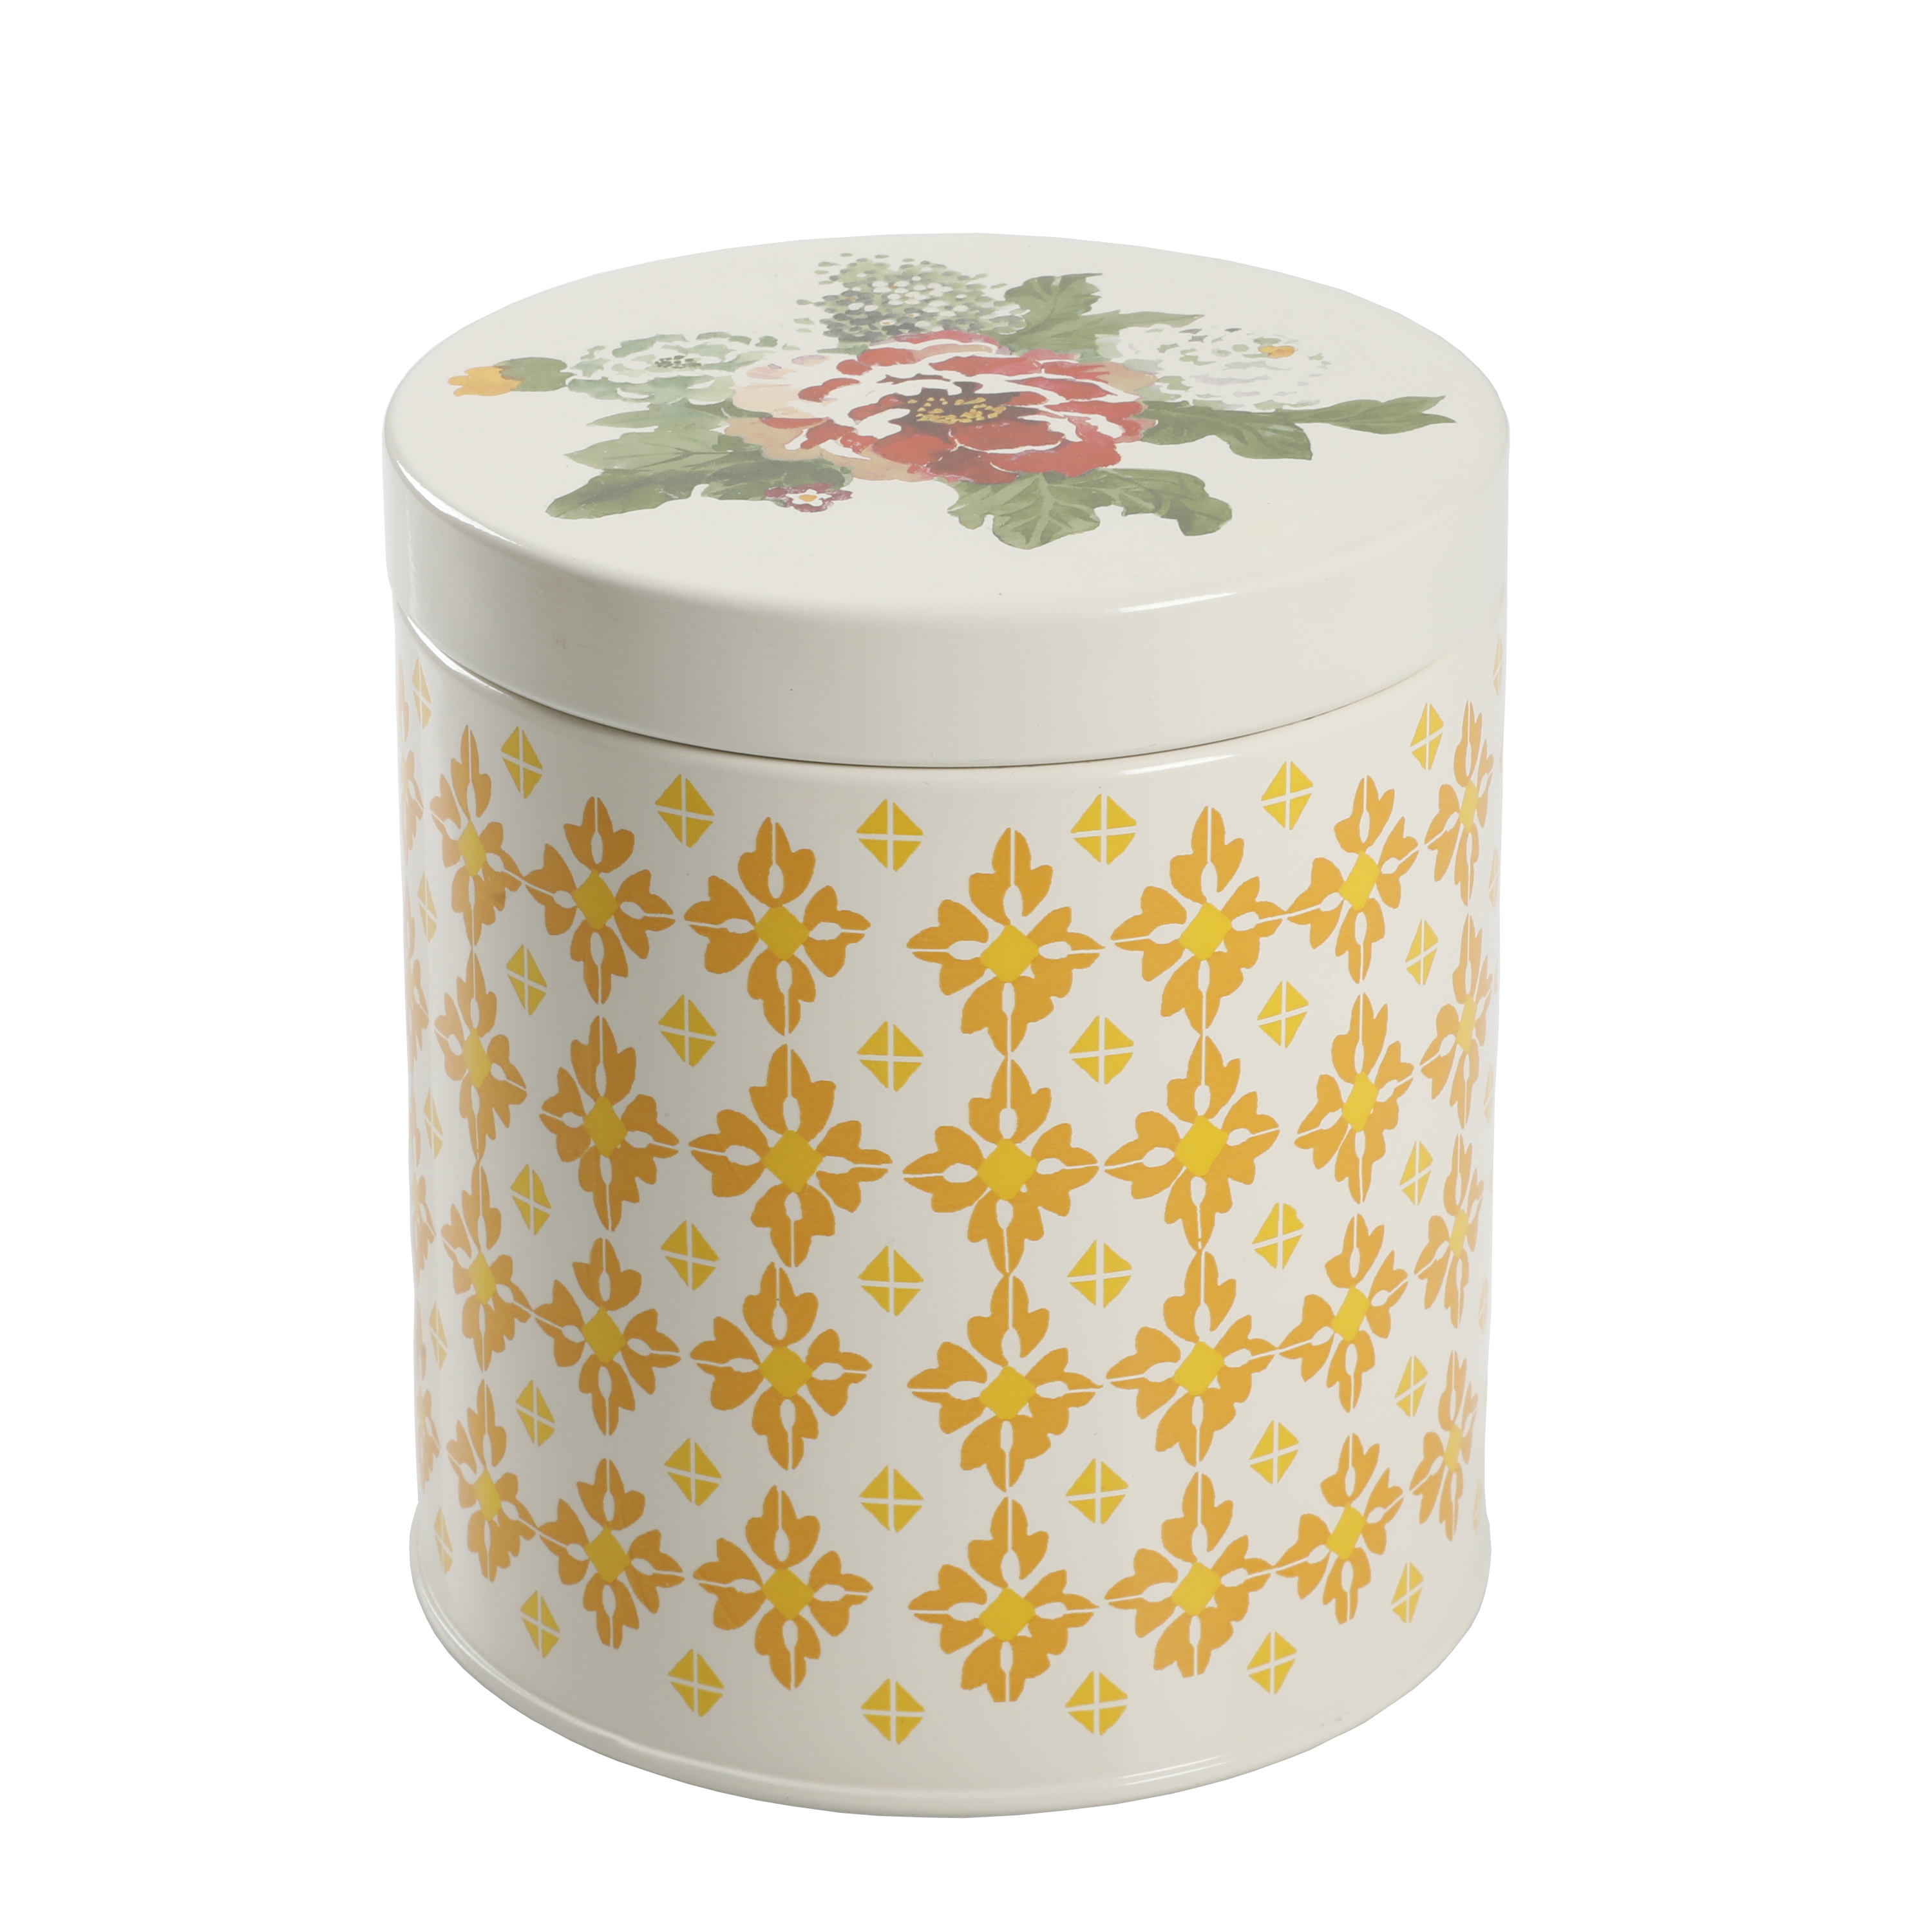 The Pioneer Woman Vintage Geo 3-Piece Canister Set - image 5 of 6